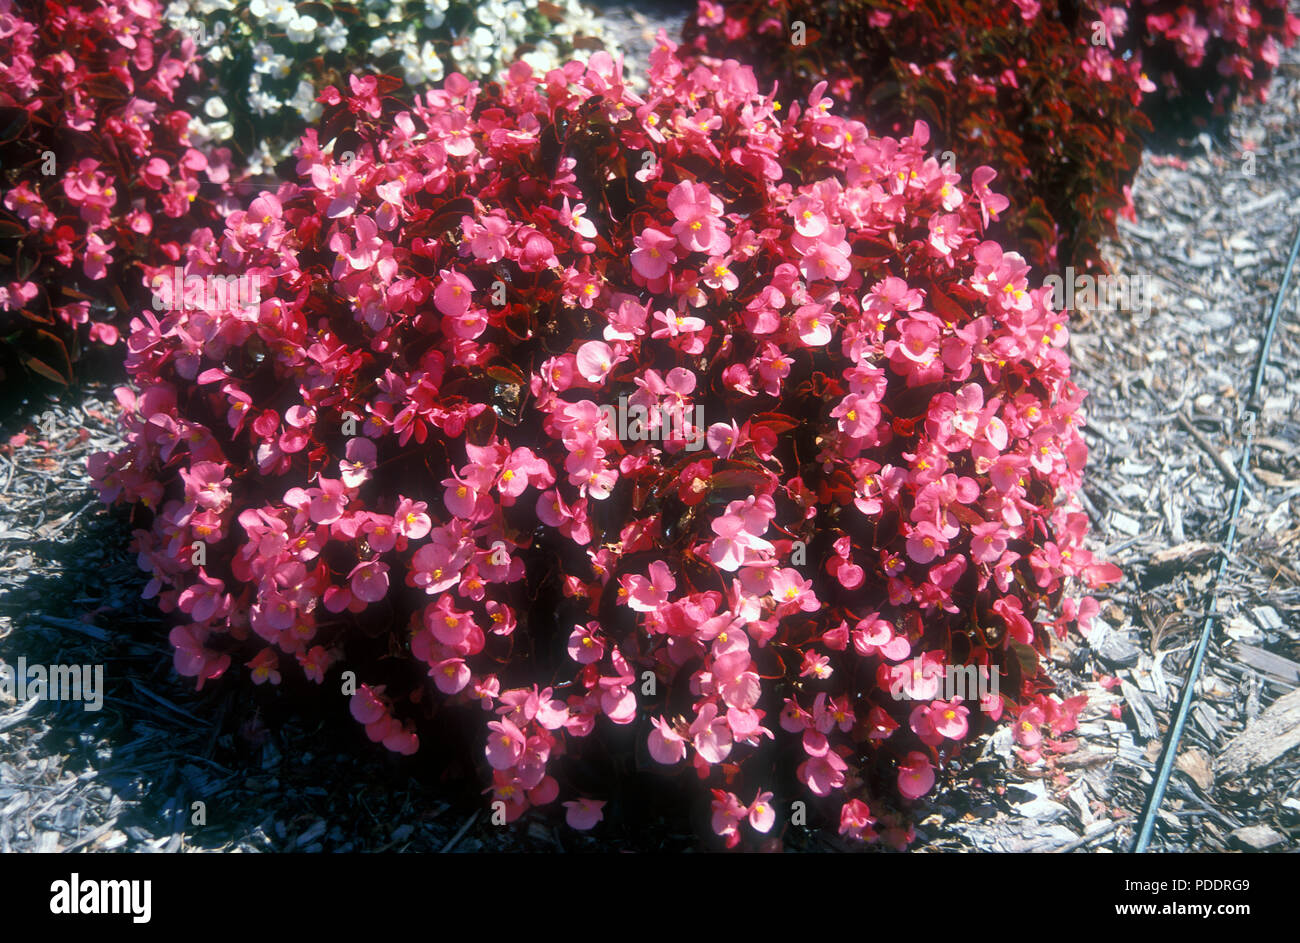 PINK BEGONIA SEMPERFLORENS FLOWERS GROWING IN GARDEN BED WITH BARK CHIPPING. Stock Photo